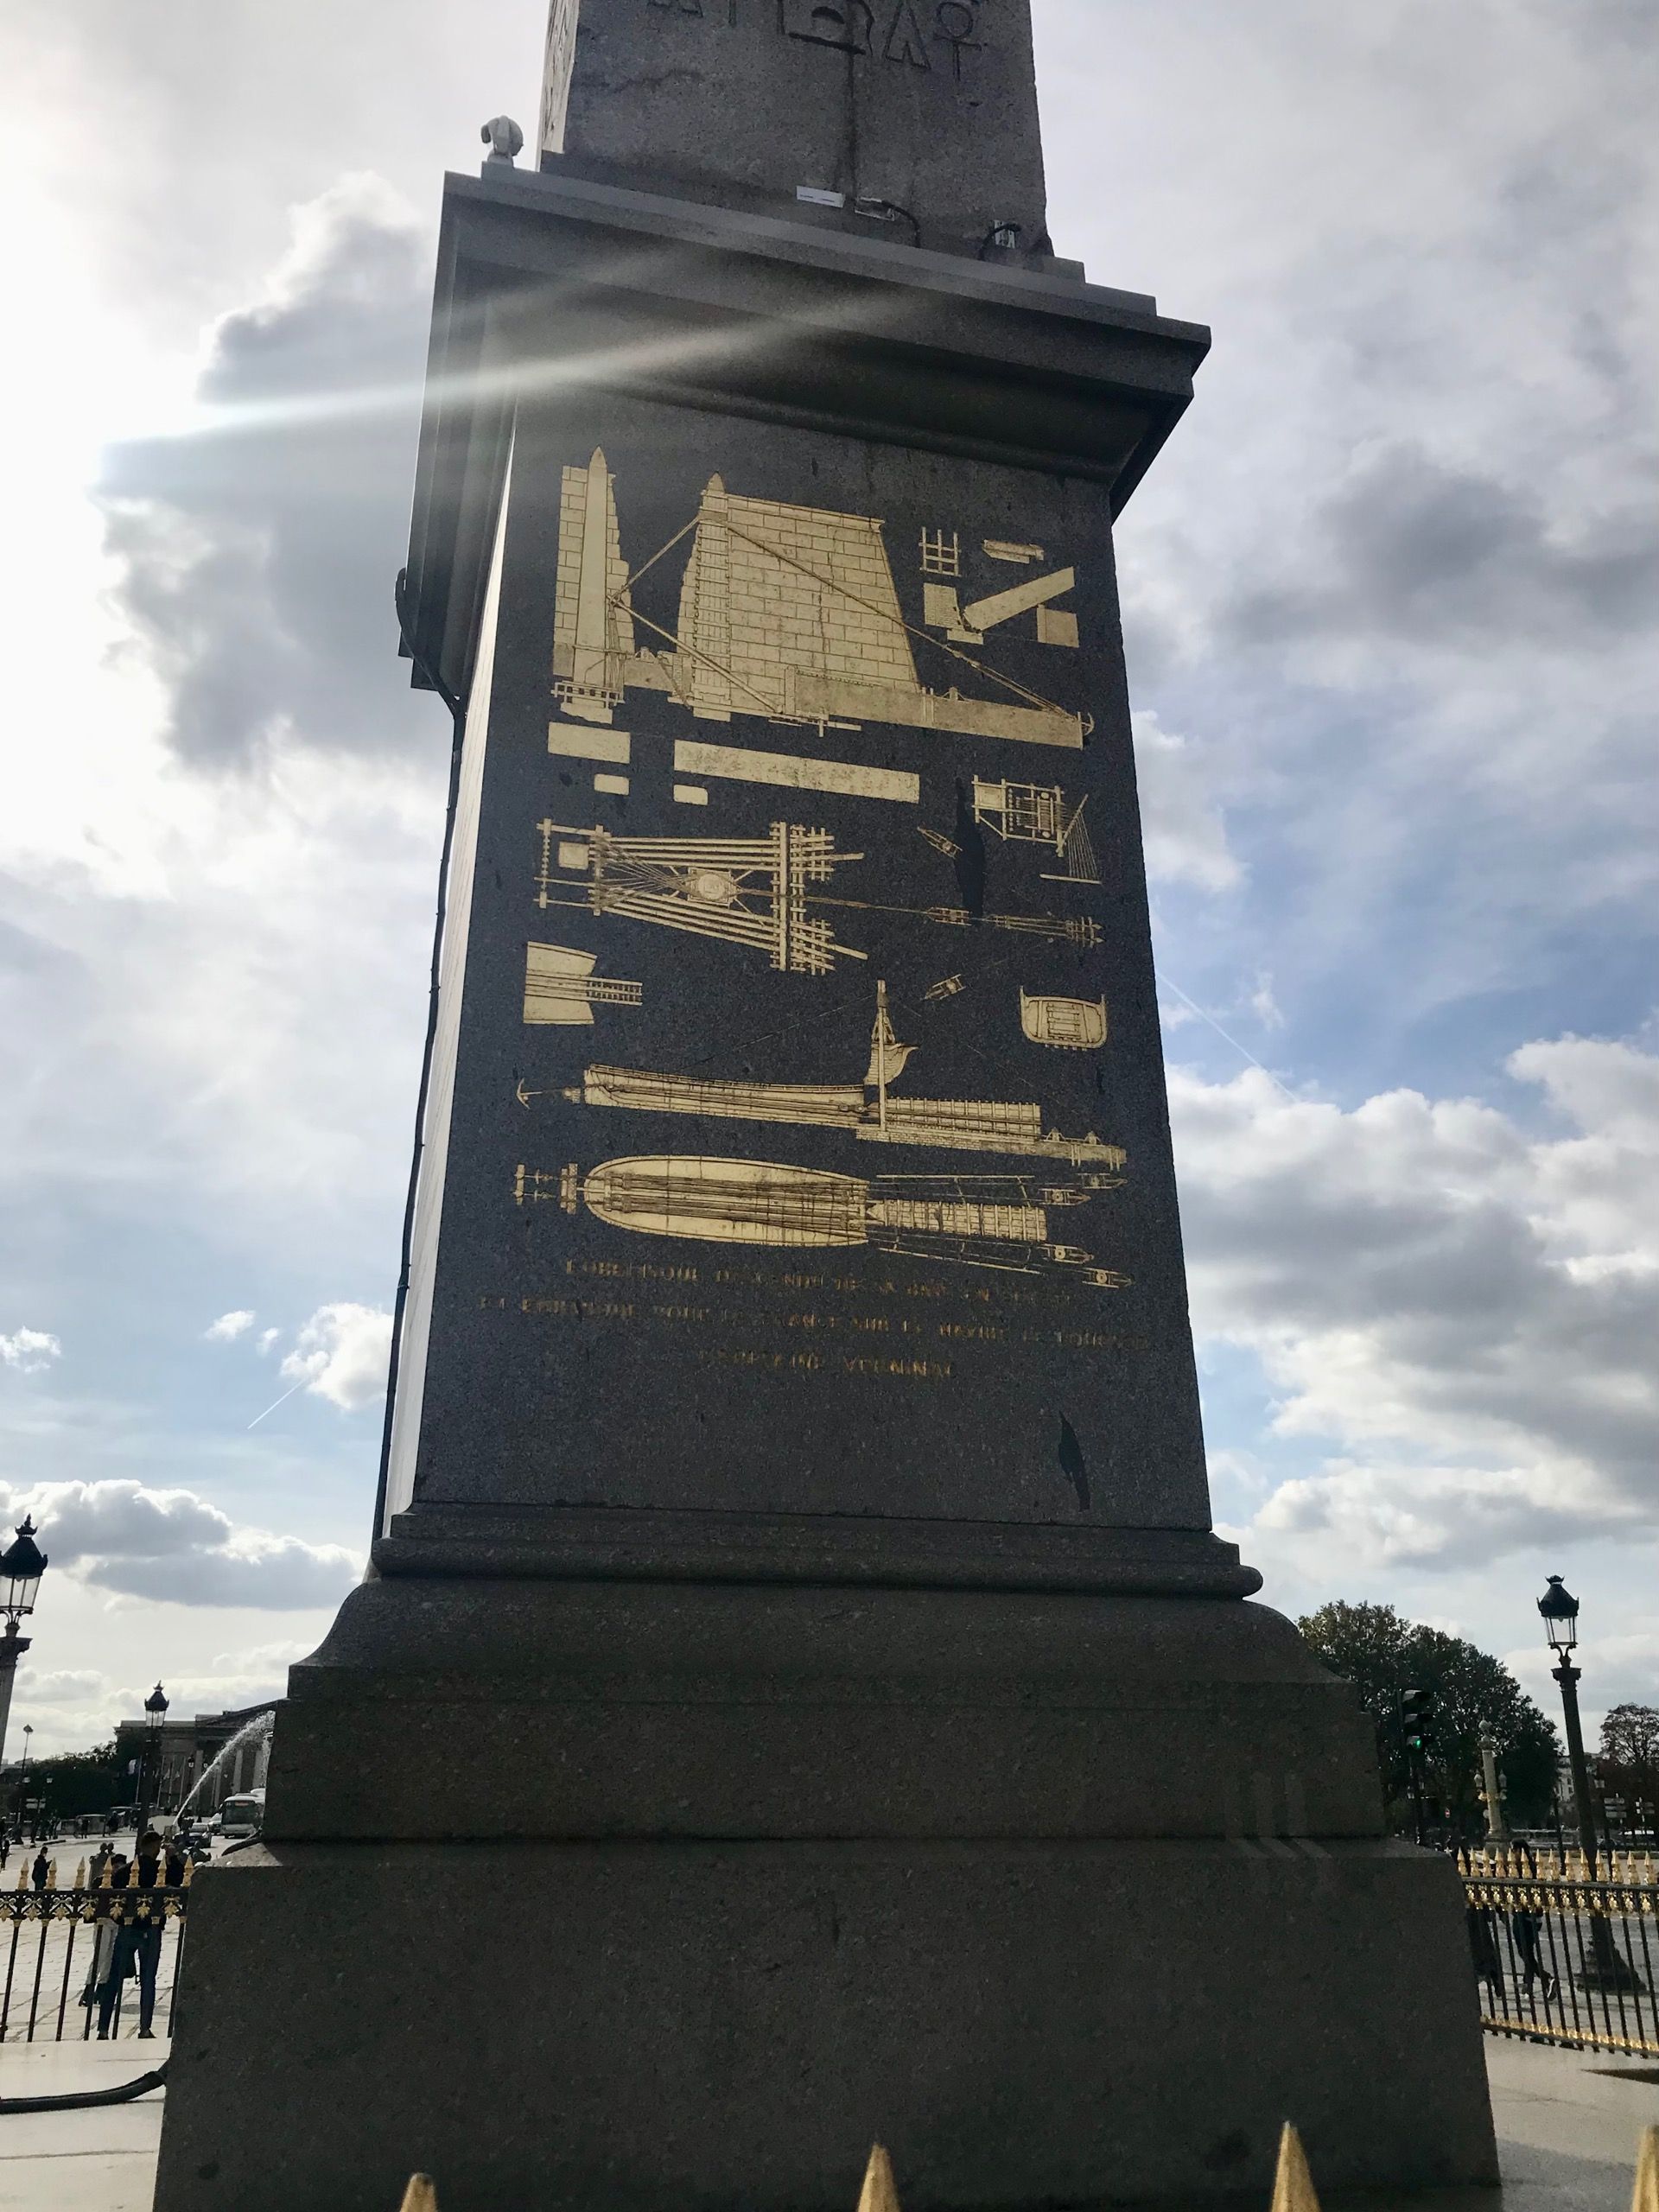 An Unlikely Egyptian Monument in Paris, France: The Luxor Obelisk